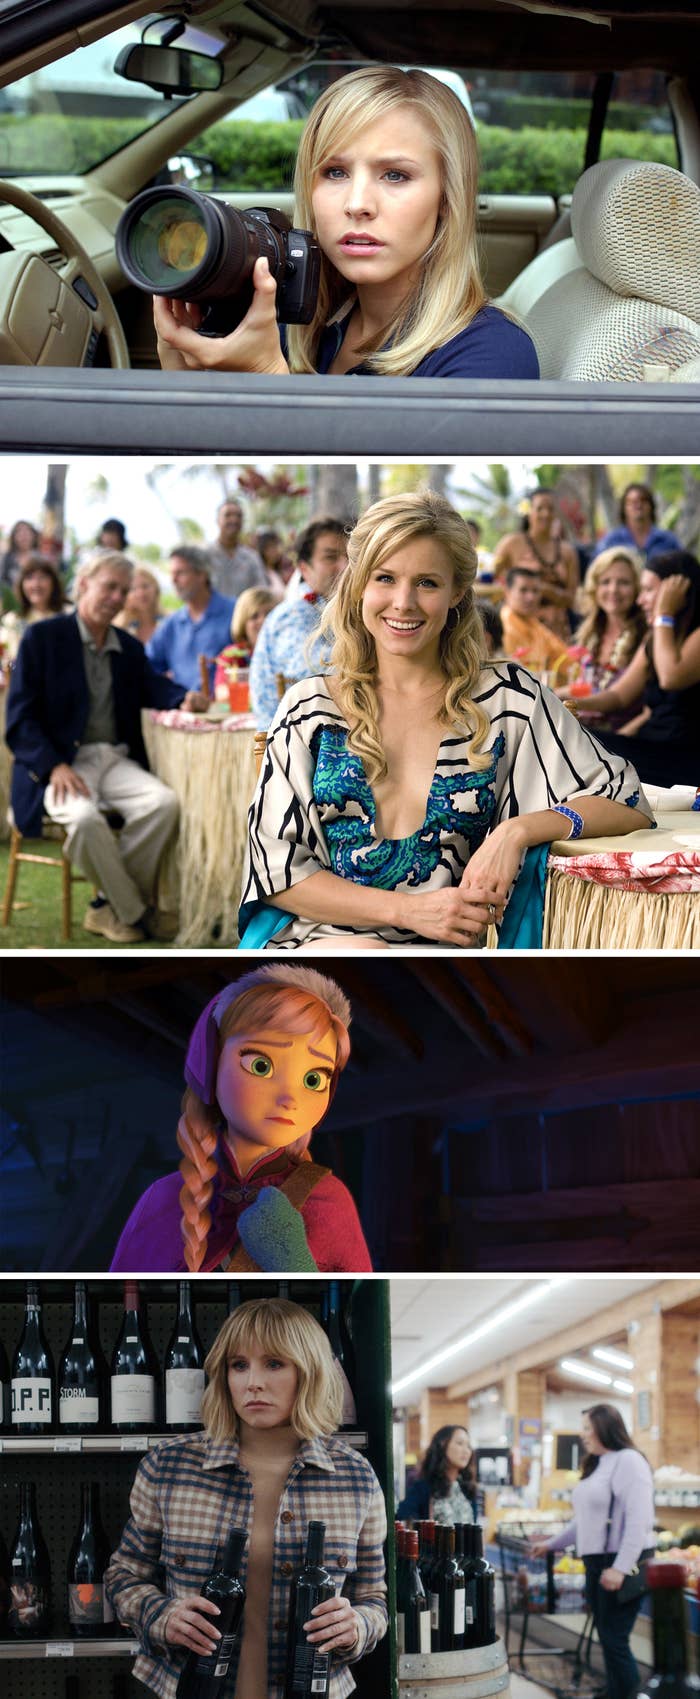 Kristen&#x27;s various roles including Anna in the animated film Frozen and Veronica Mars